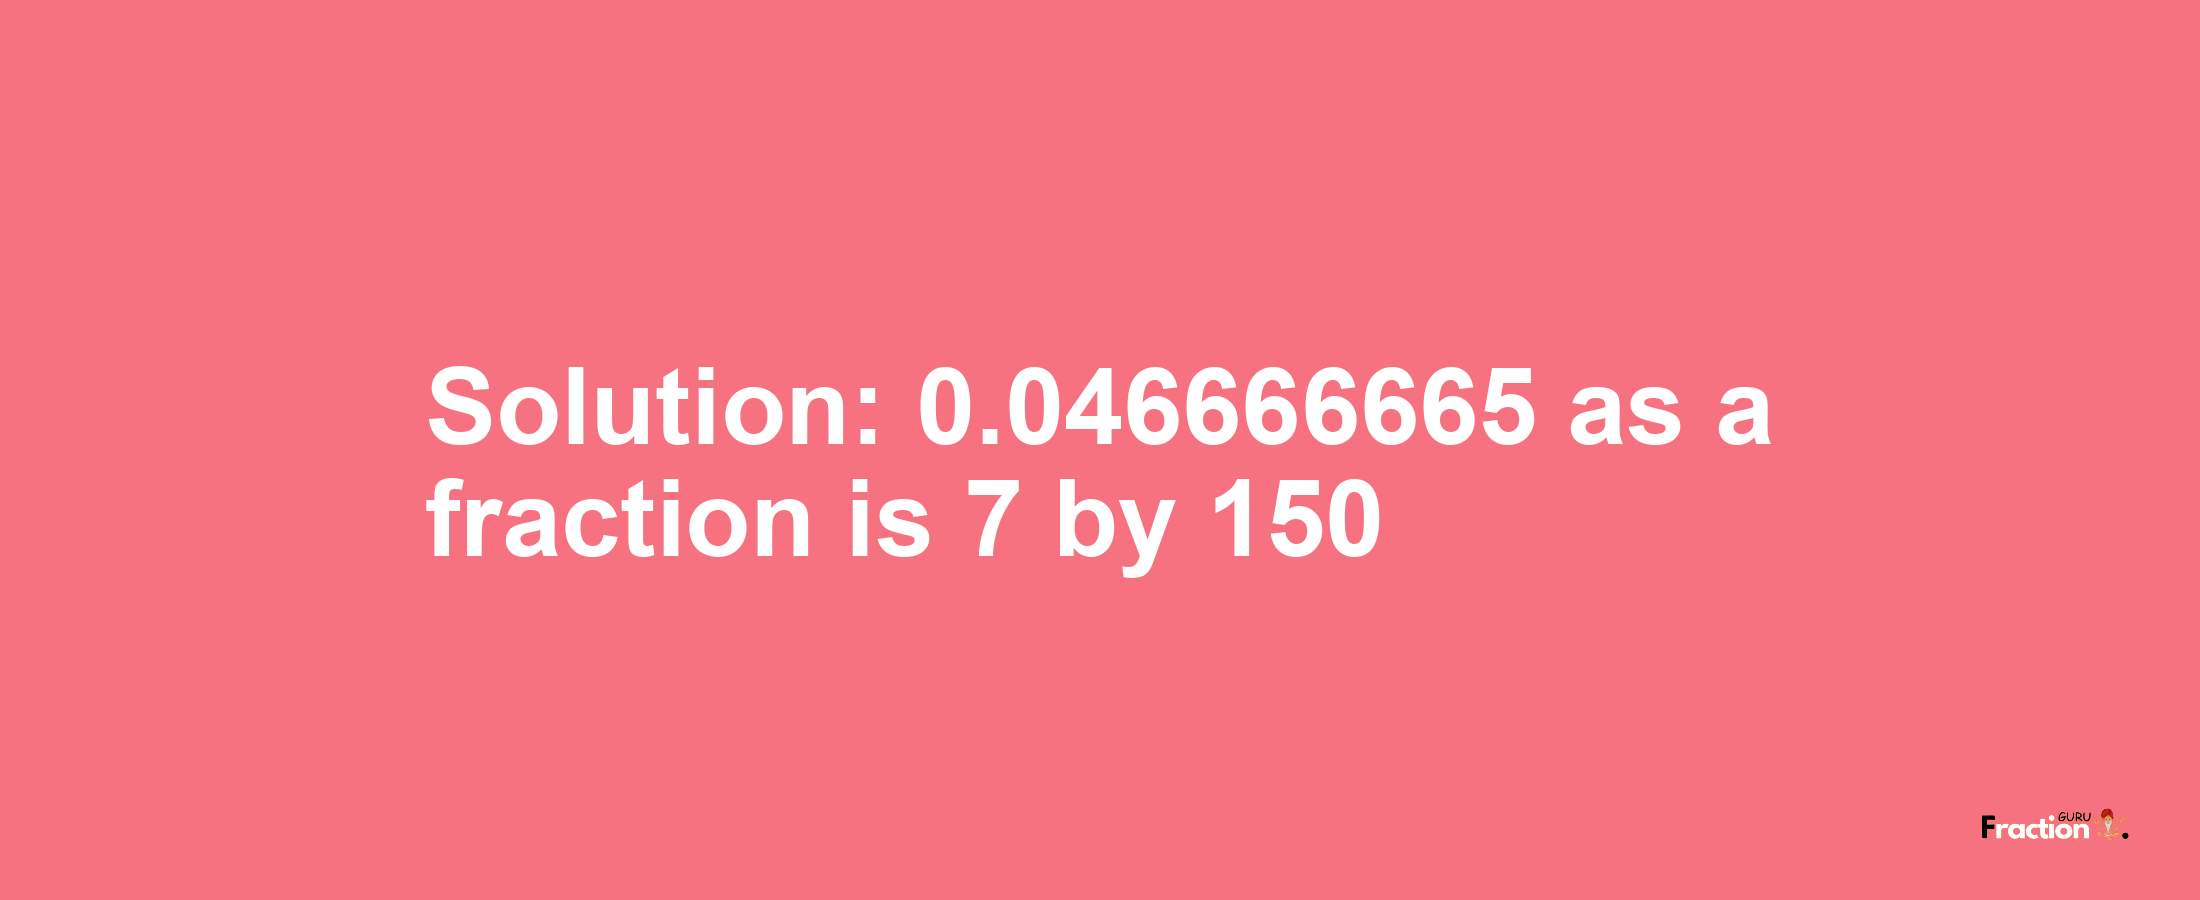 Solution:0.046666665 as a fraction is 7/150